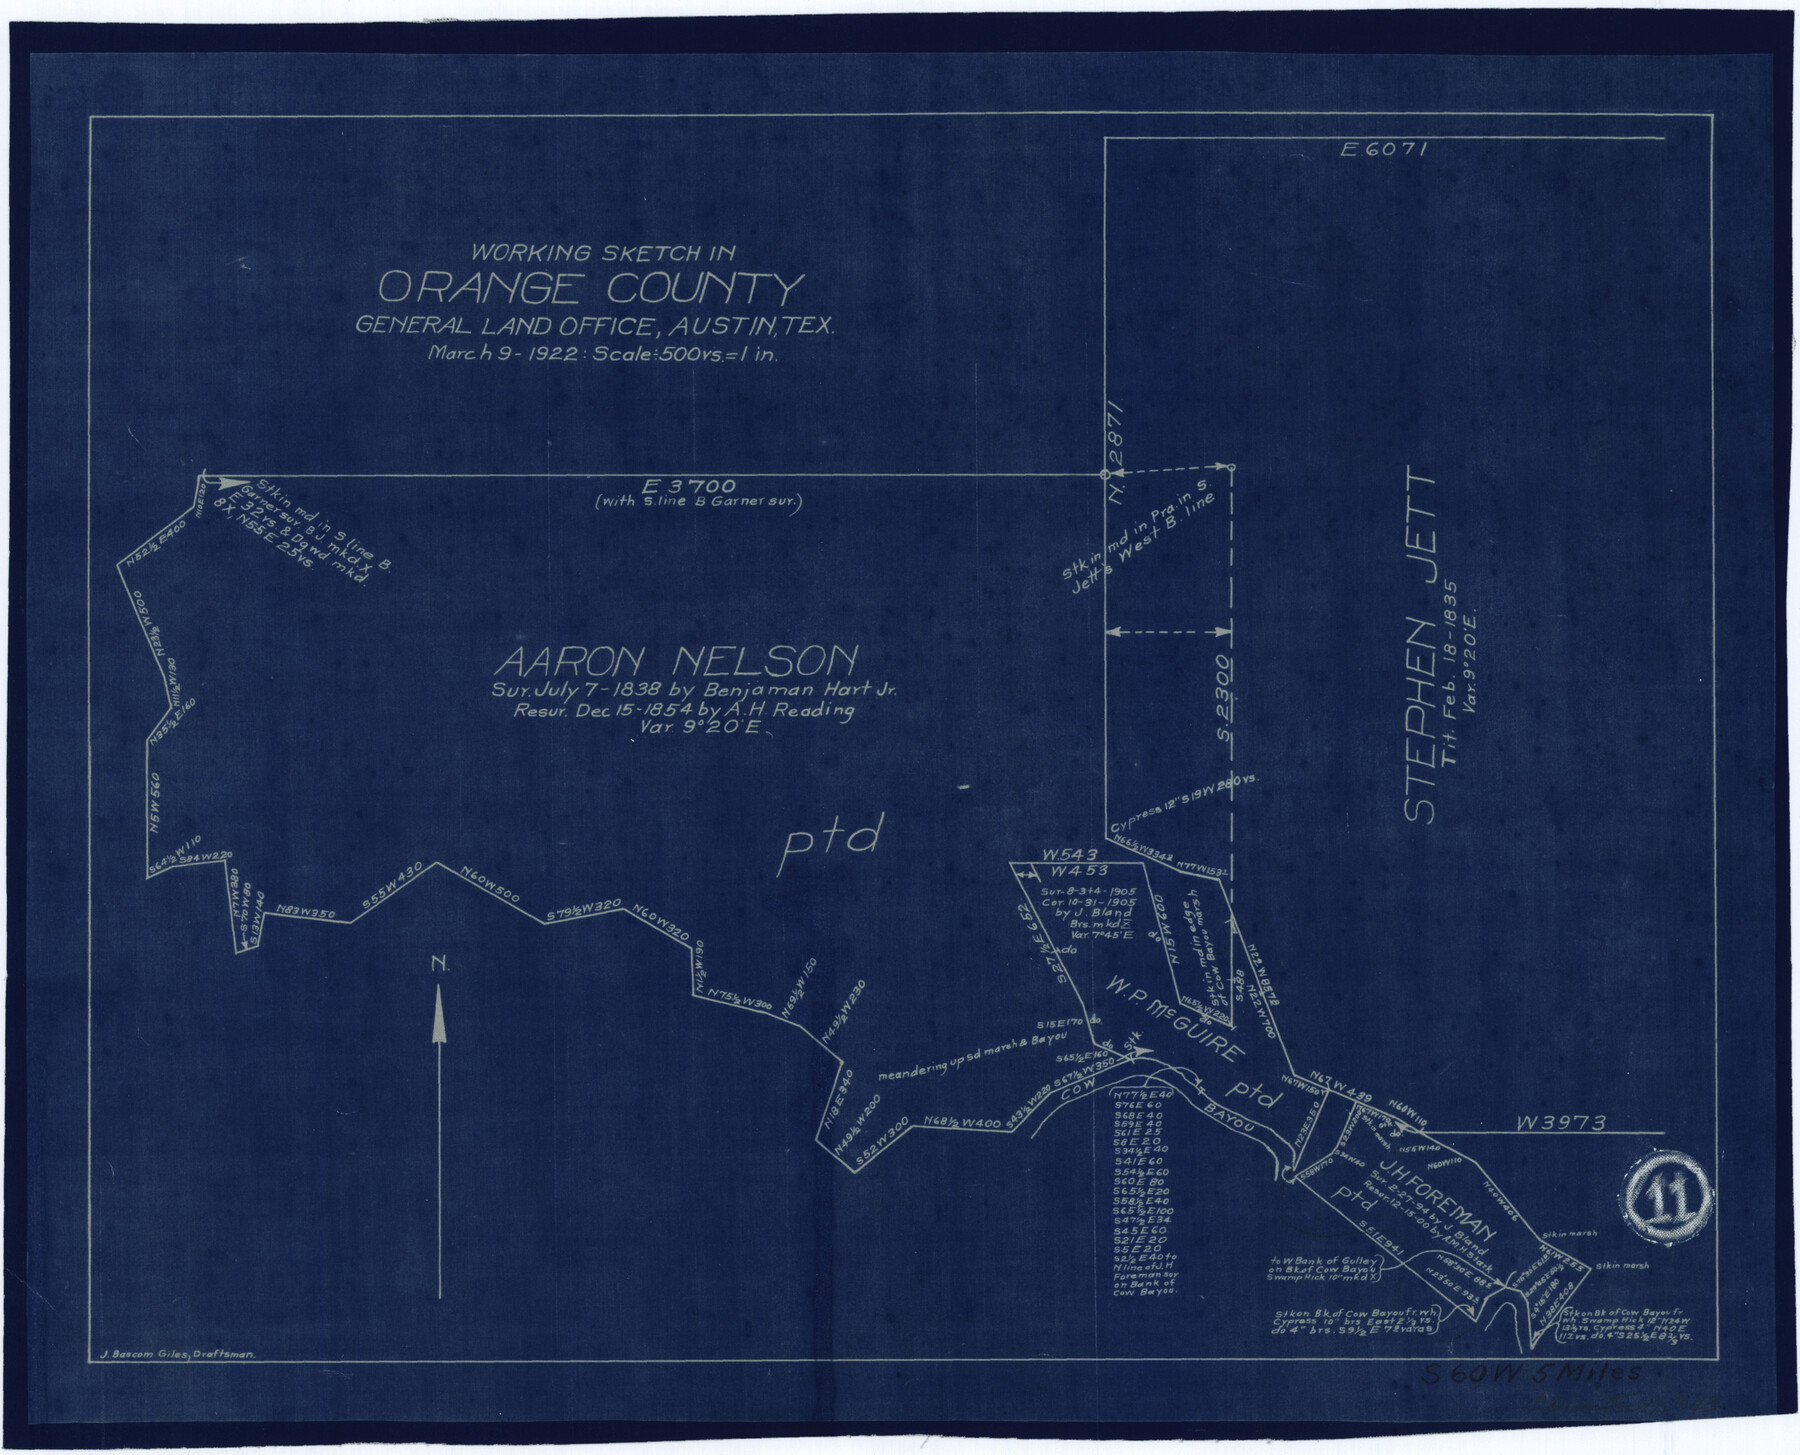 71343, Orange County Working Sketch 11, General Map Collection